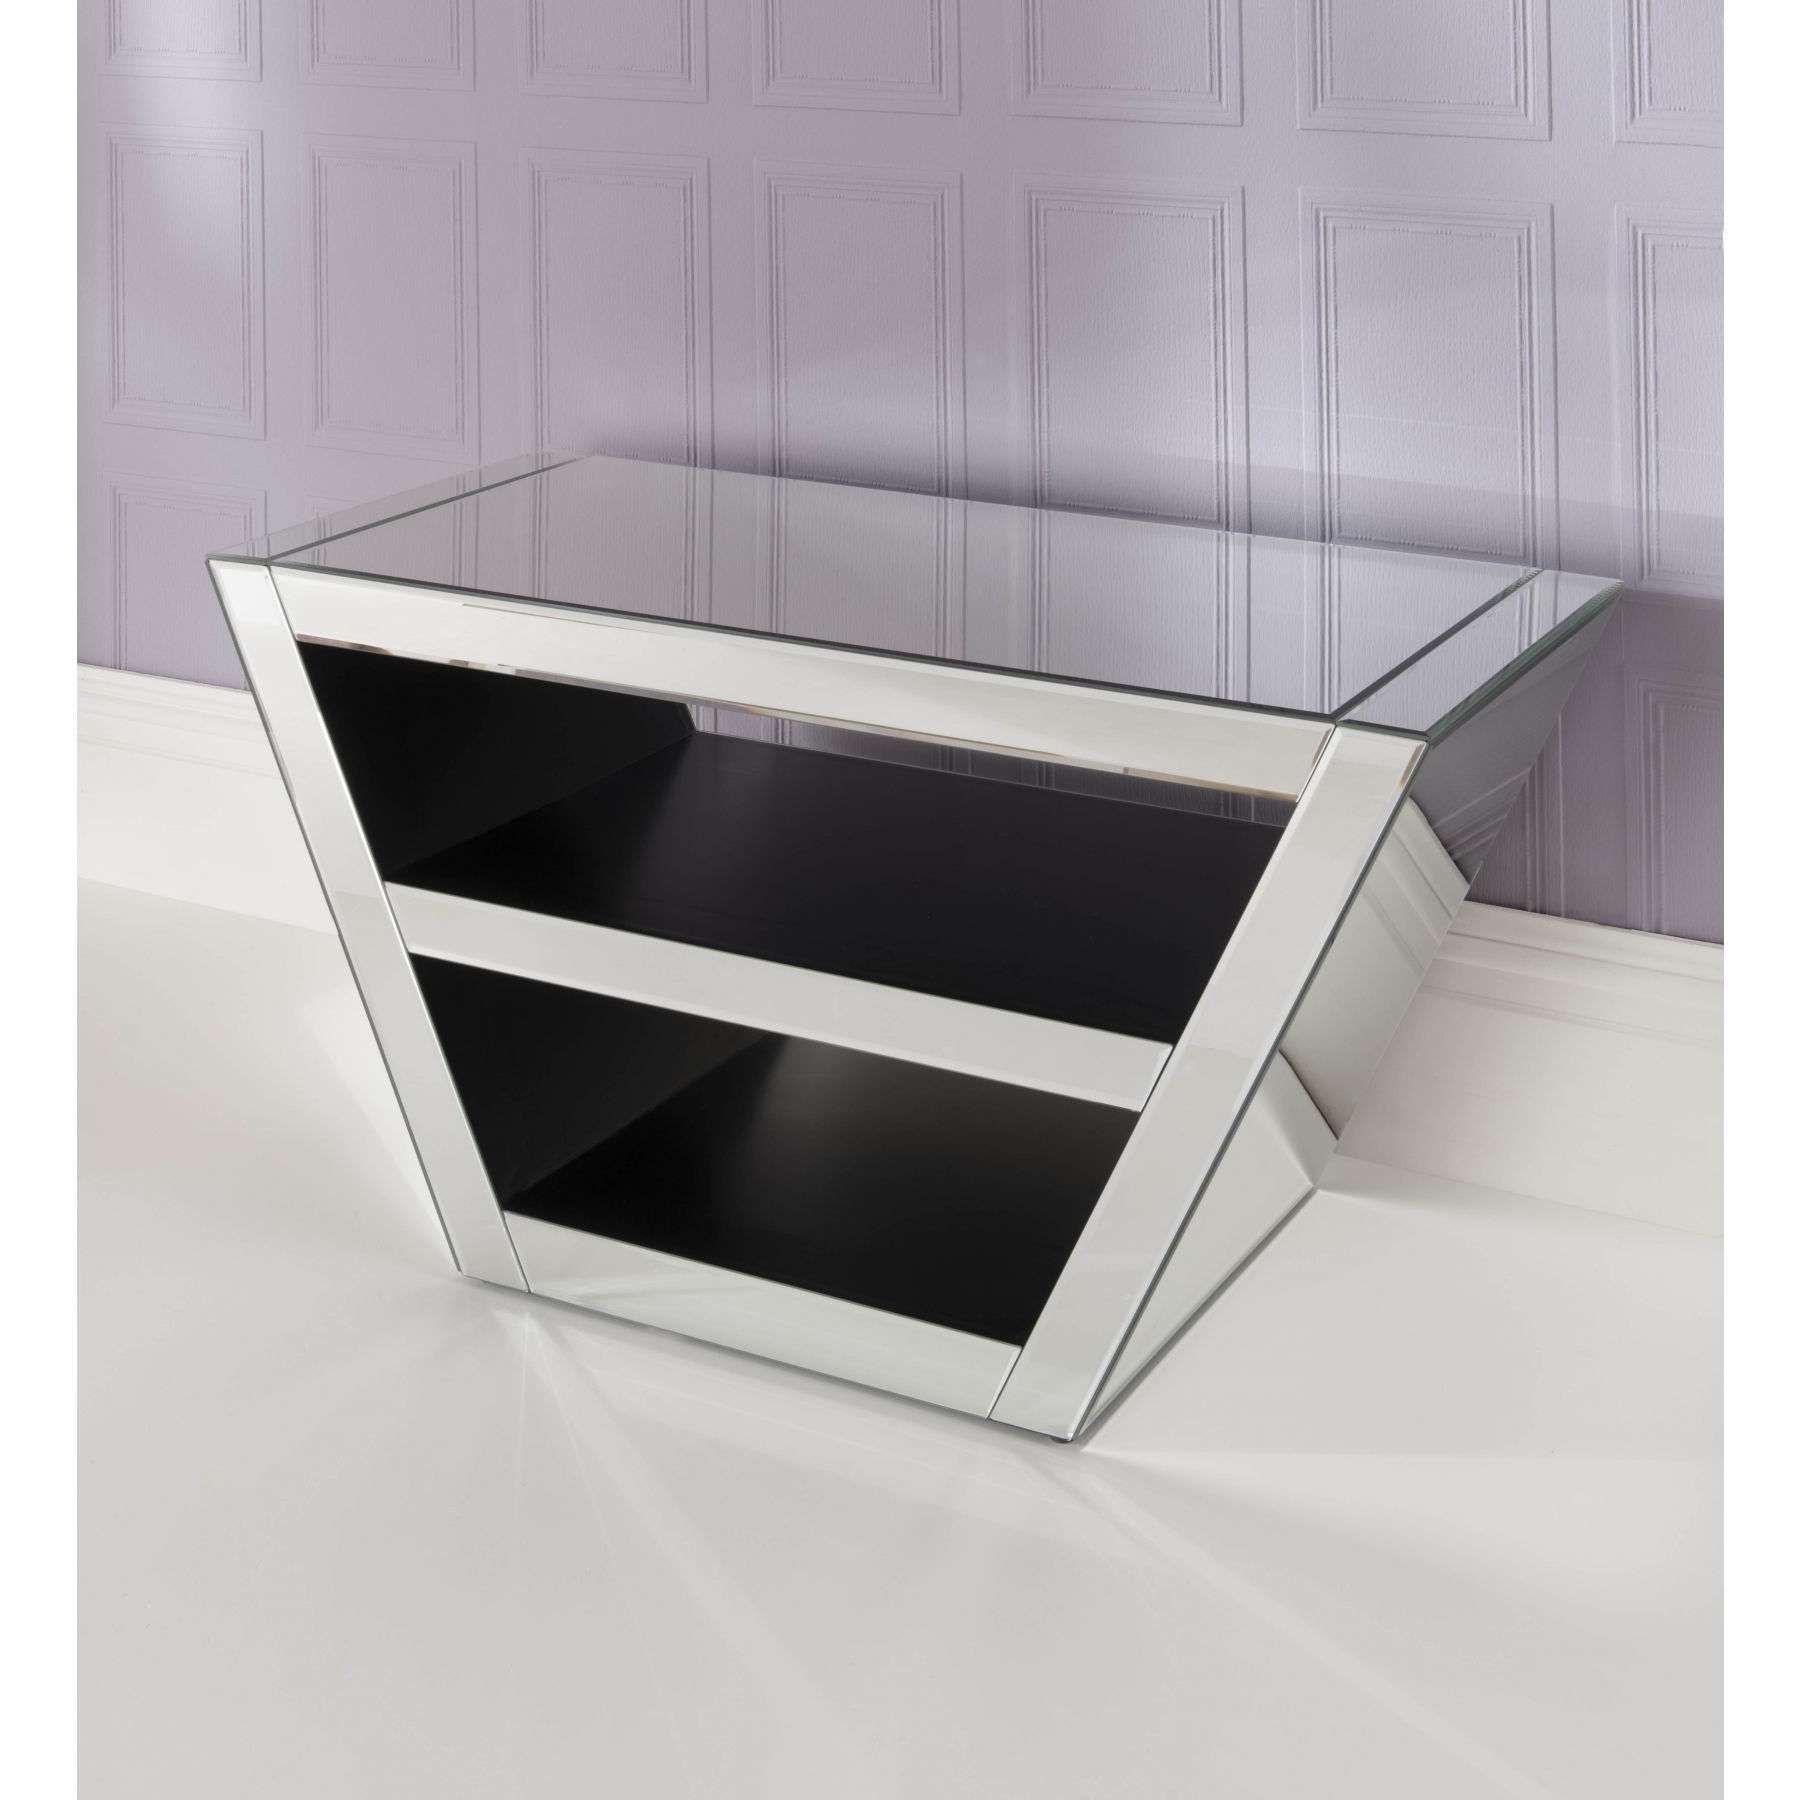 Mirrored Tv Cabinet | Venetian Glass Tv Stand | Homesdirect365 Within Glass Tv Cabinets (Gallery 1 of 20)